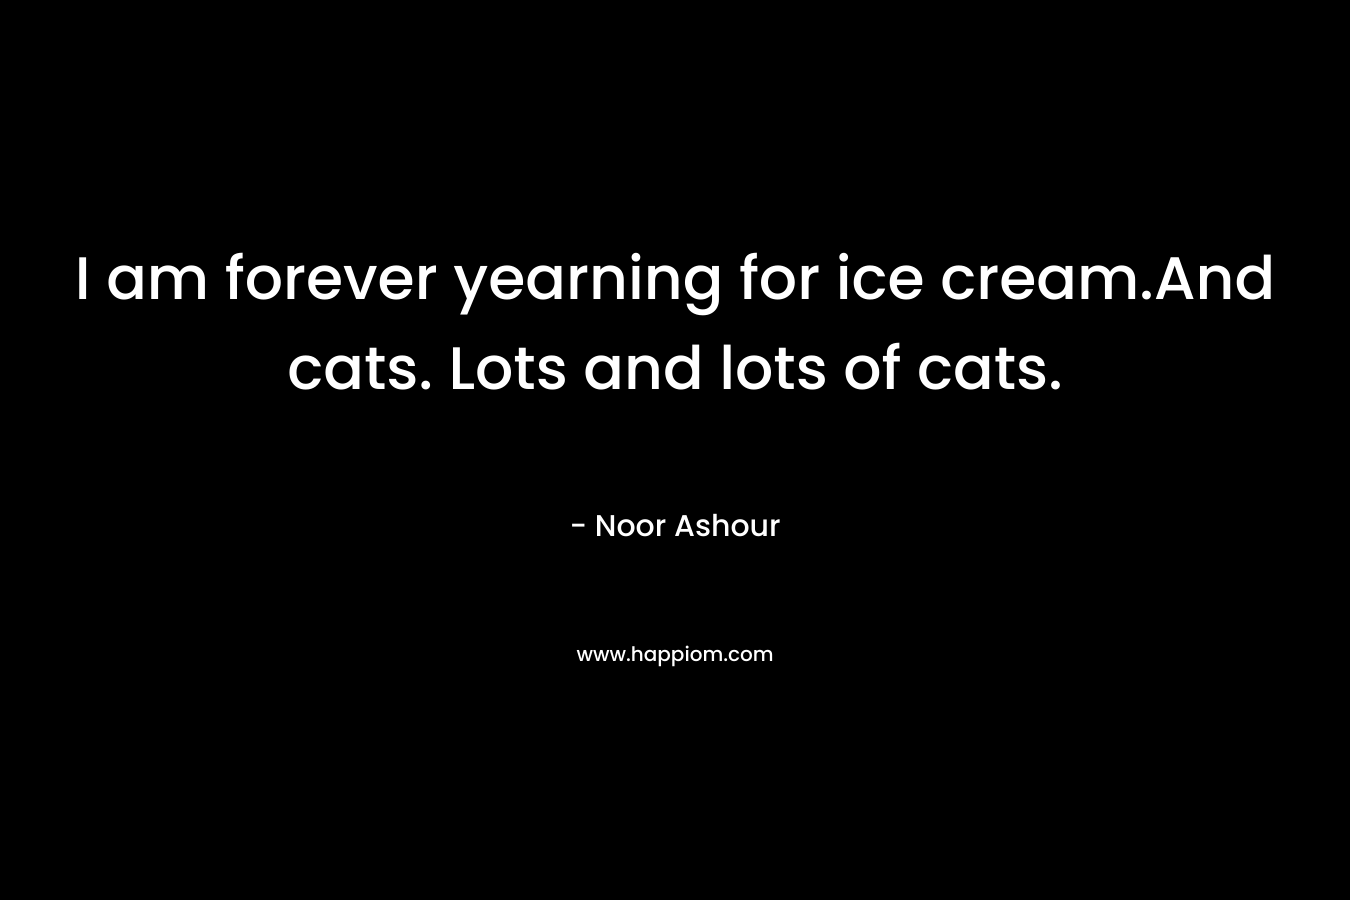 I am forever yearning for ice cream.And cats. Lots and lots of cats. – Noor Ashour